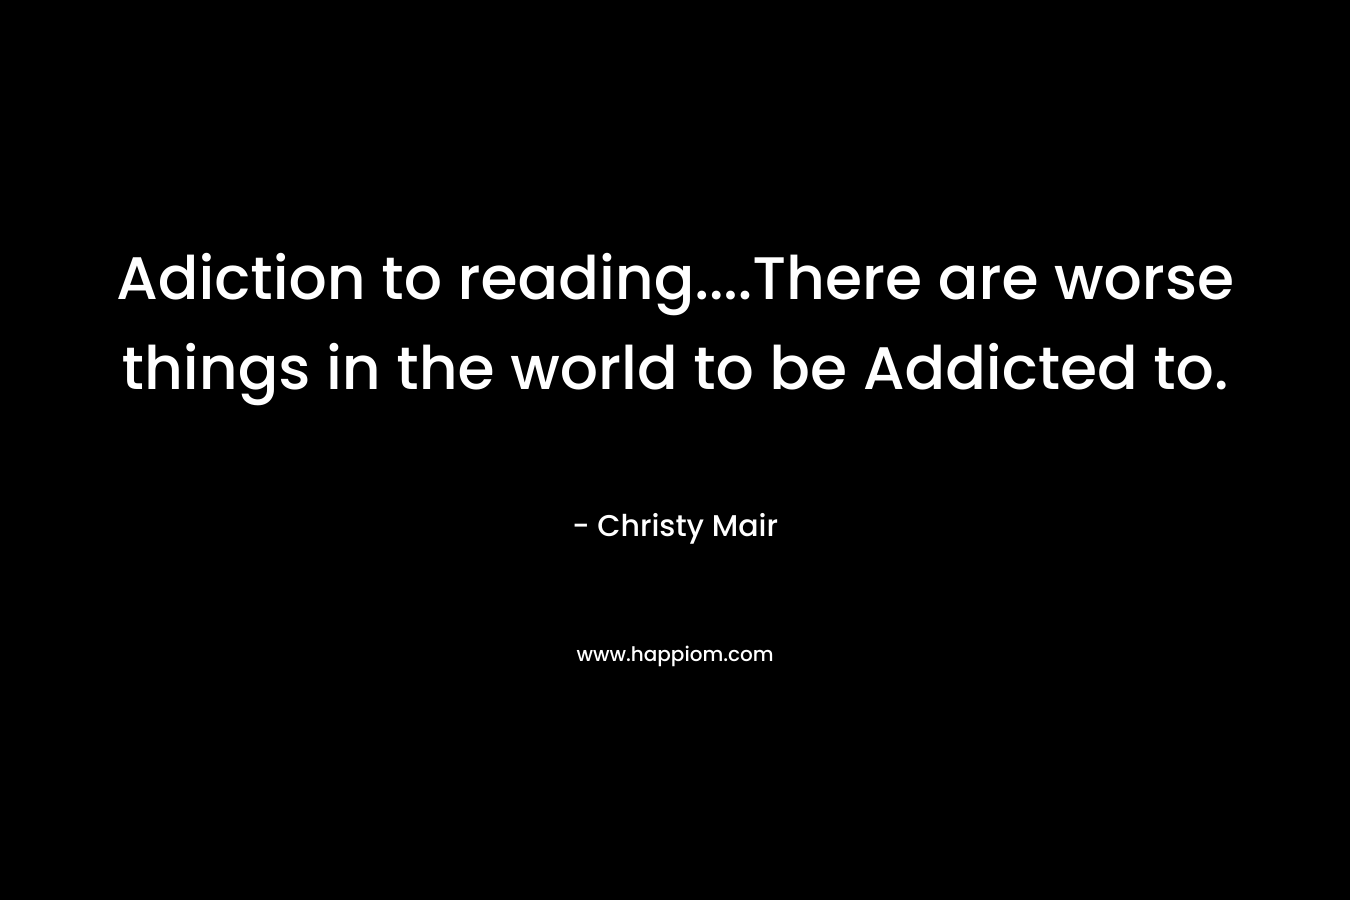 Adiction to reading….There are worse things in the world to be Addicted to. – Christy Mair